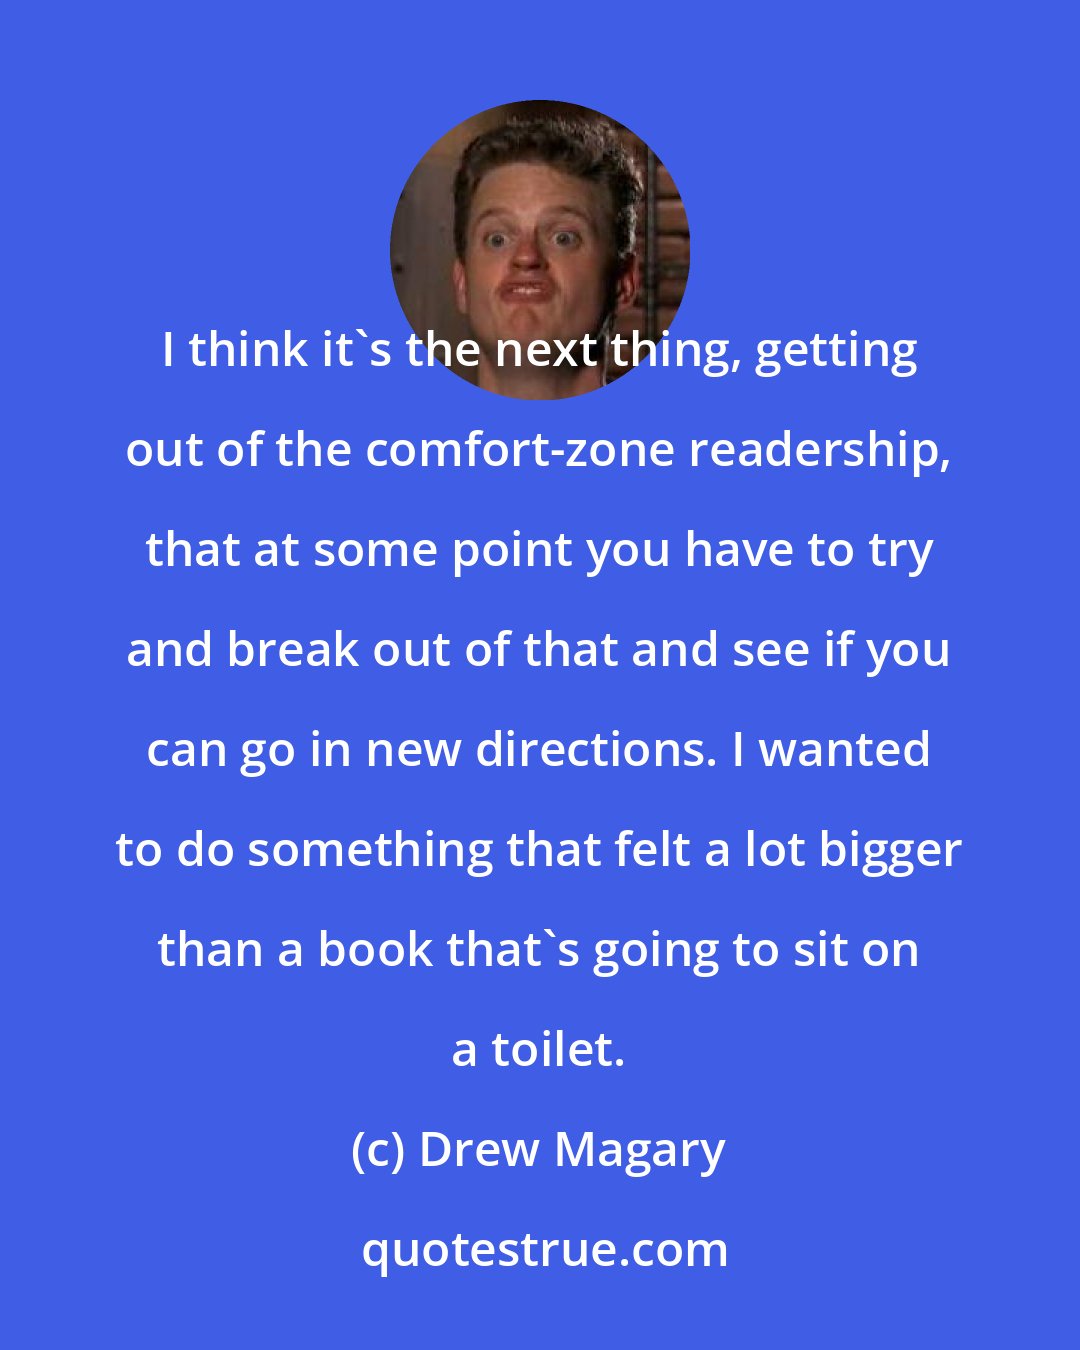 Drew Magary: I think it's the next thing, getting out of the comfort-zone readership, that at some point you have to try and break out of that and see if you can go in new directions. I wanted to do something that felt a lot bigger than a book that's going to sit on a toilet.